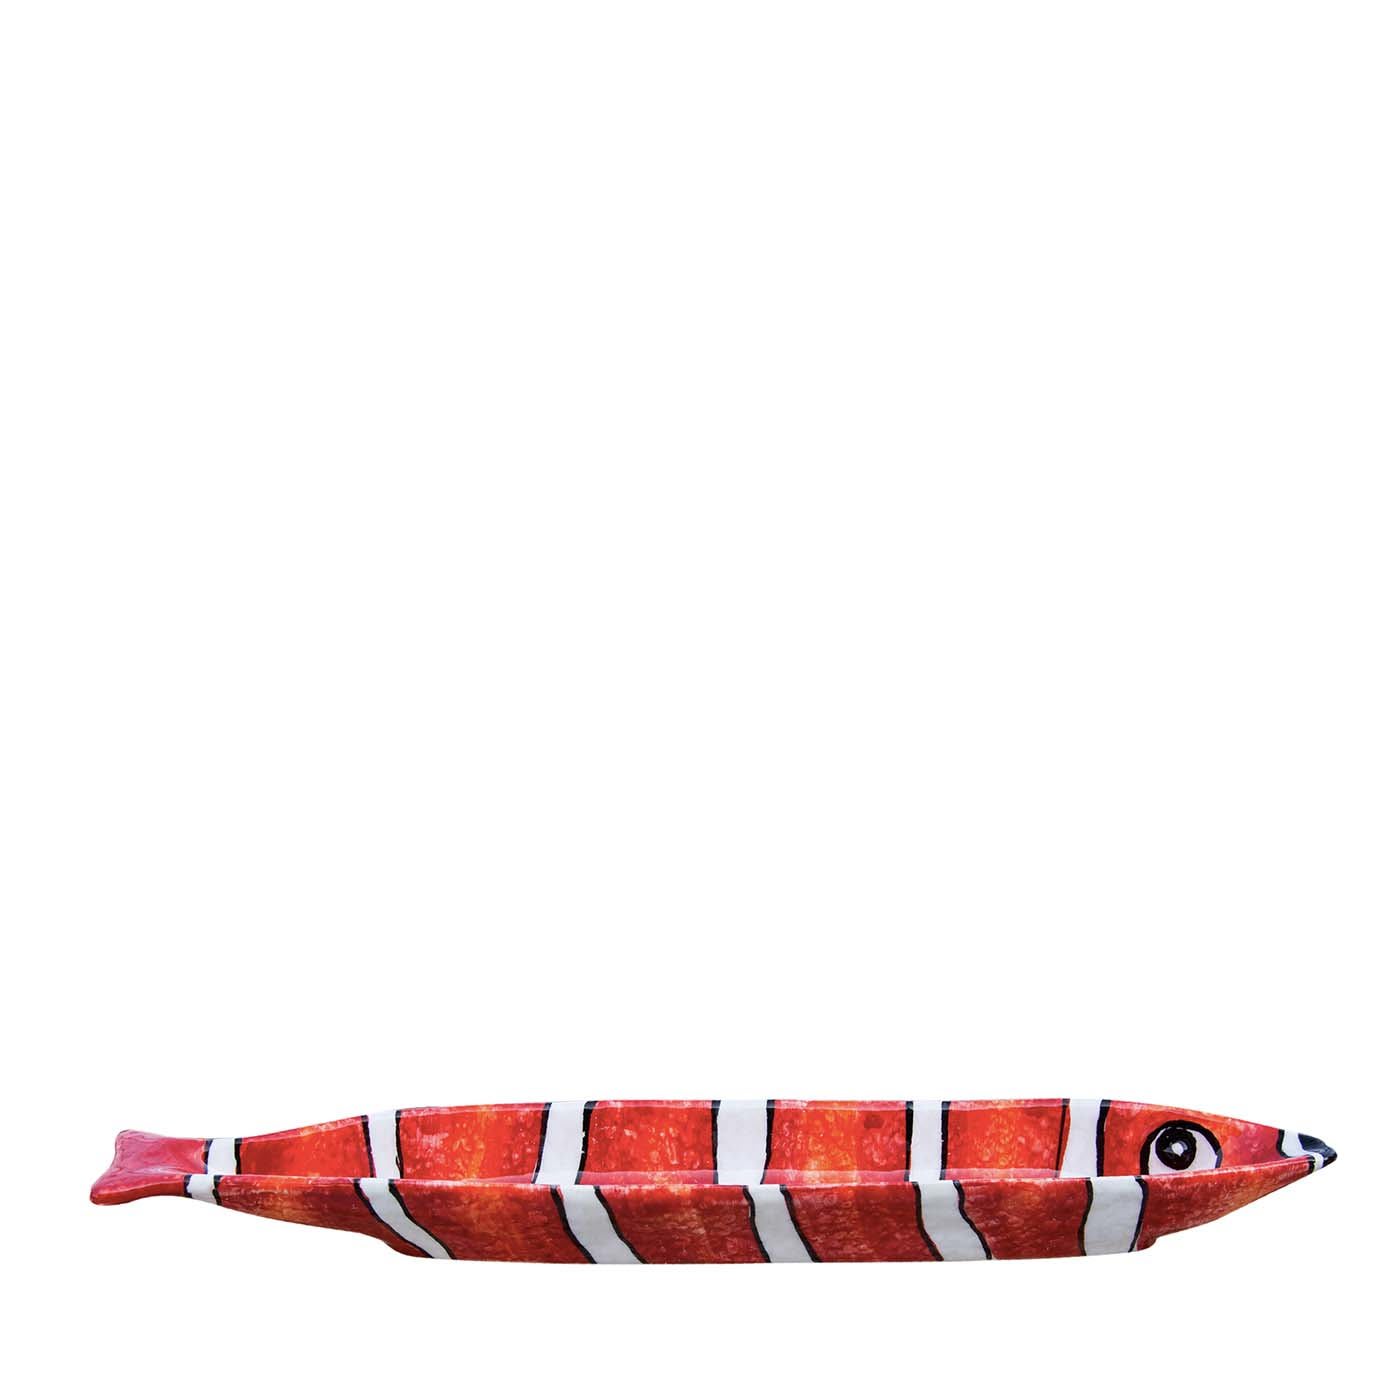 Nemo Red Set of 2 Appetizer Boats - Ceramiche Edelweiss